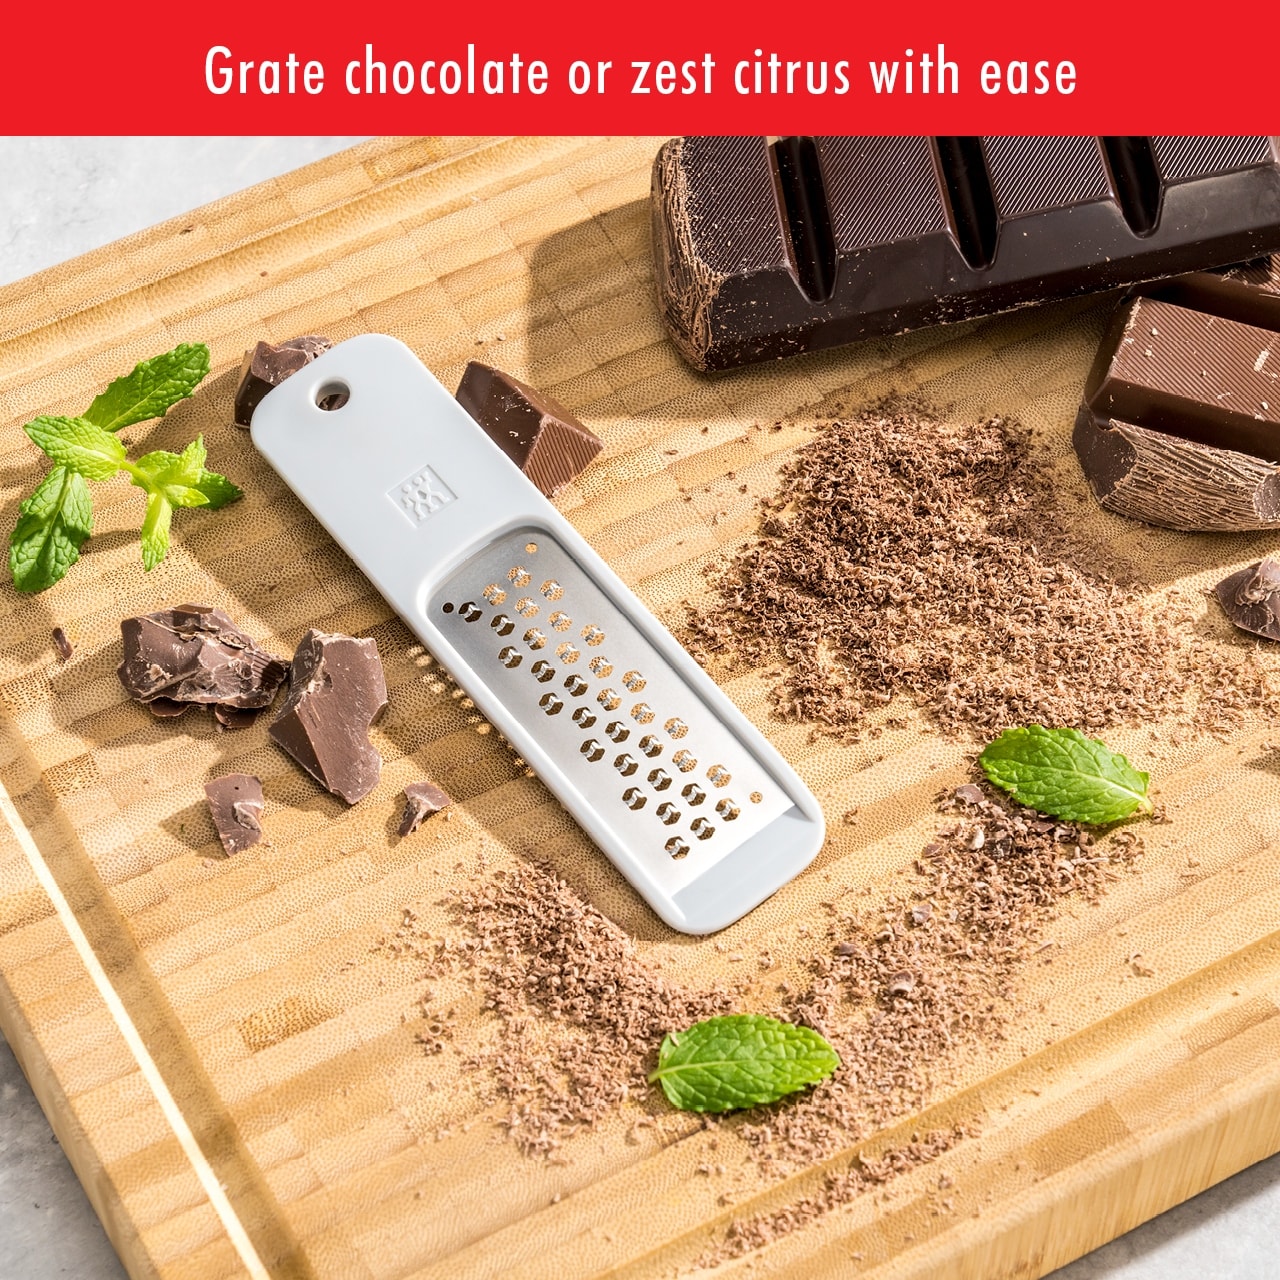 https://ak1.ostkcdn.com/images/products/is/images/direct/807a73f3633d6f24ad180b6c69d307b06624dafb/ZWILLING-Z-Cut-Mini-Grater.jpg